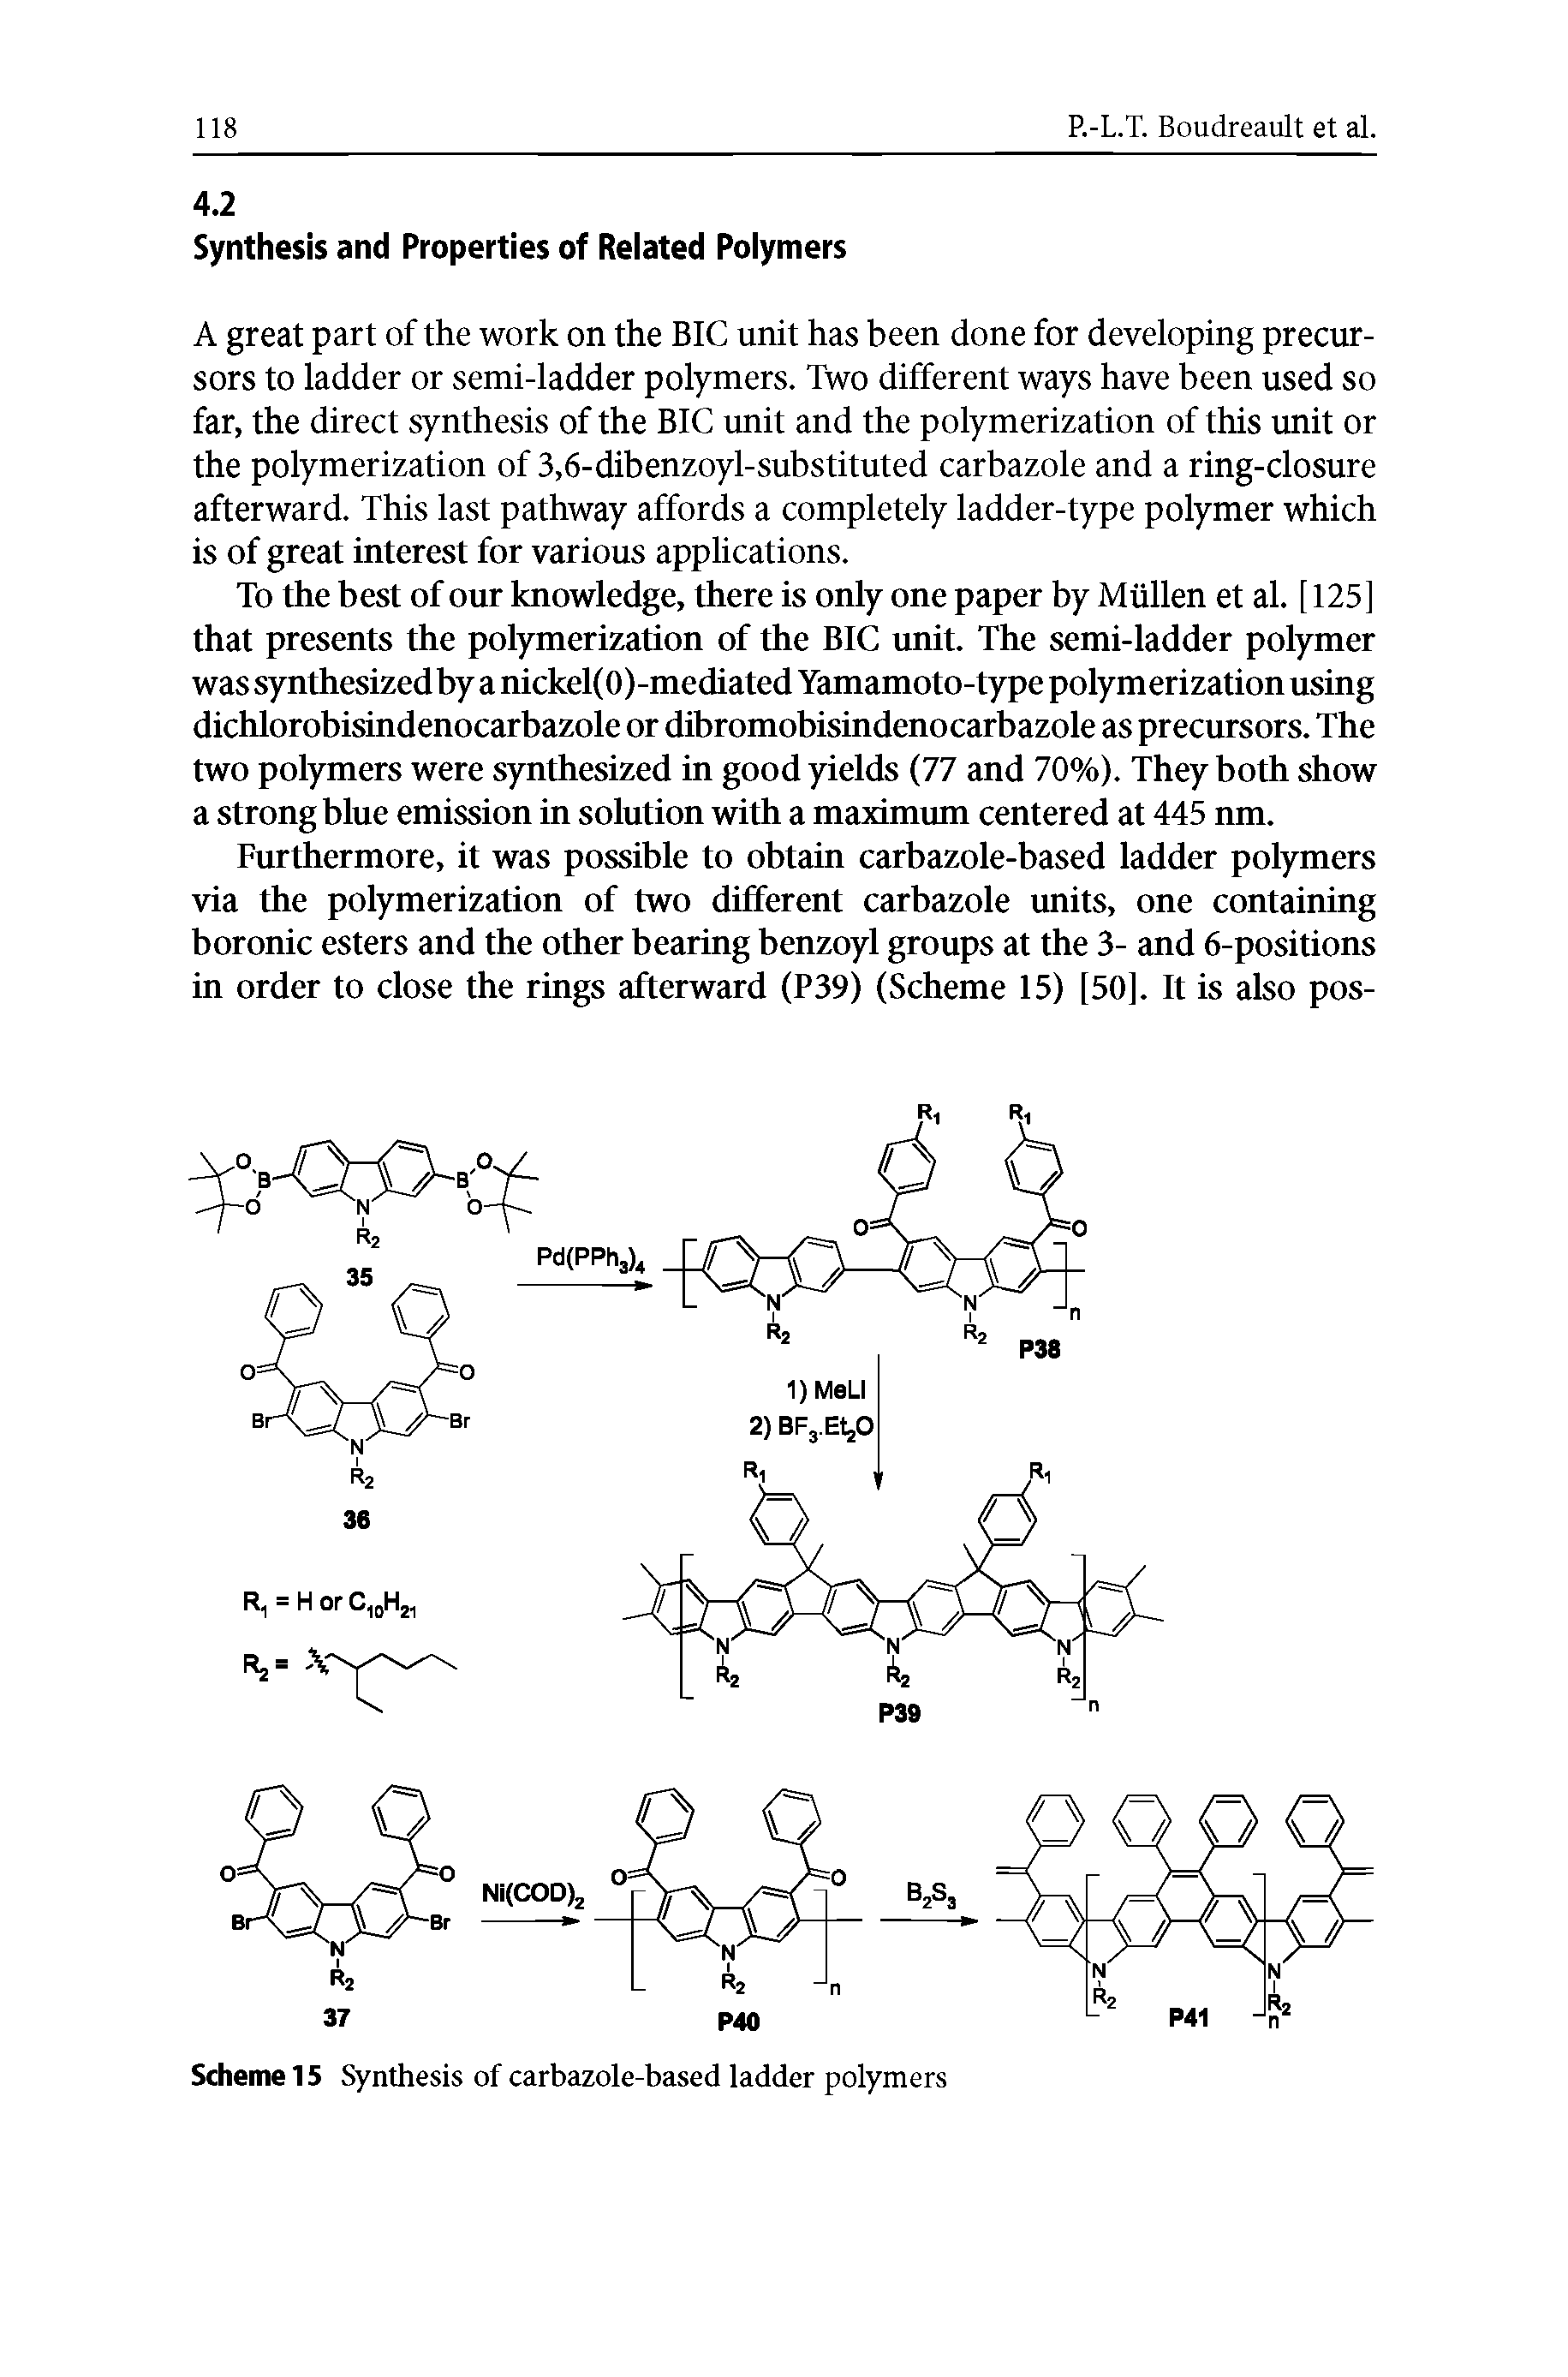 Scheme 15 Synthesis of carbazole-based ladder polymers...